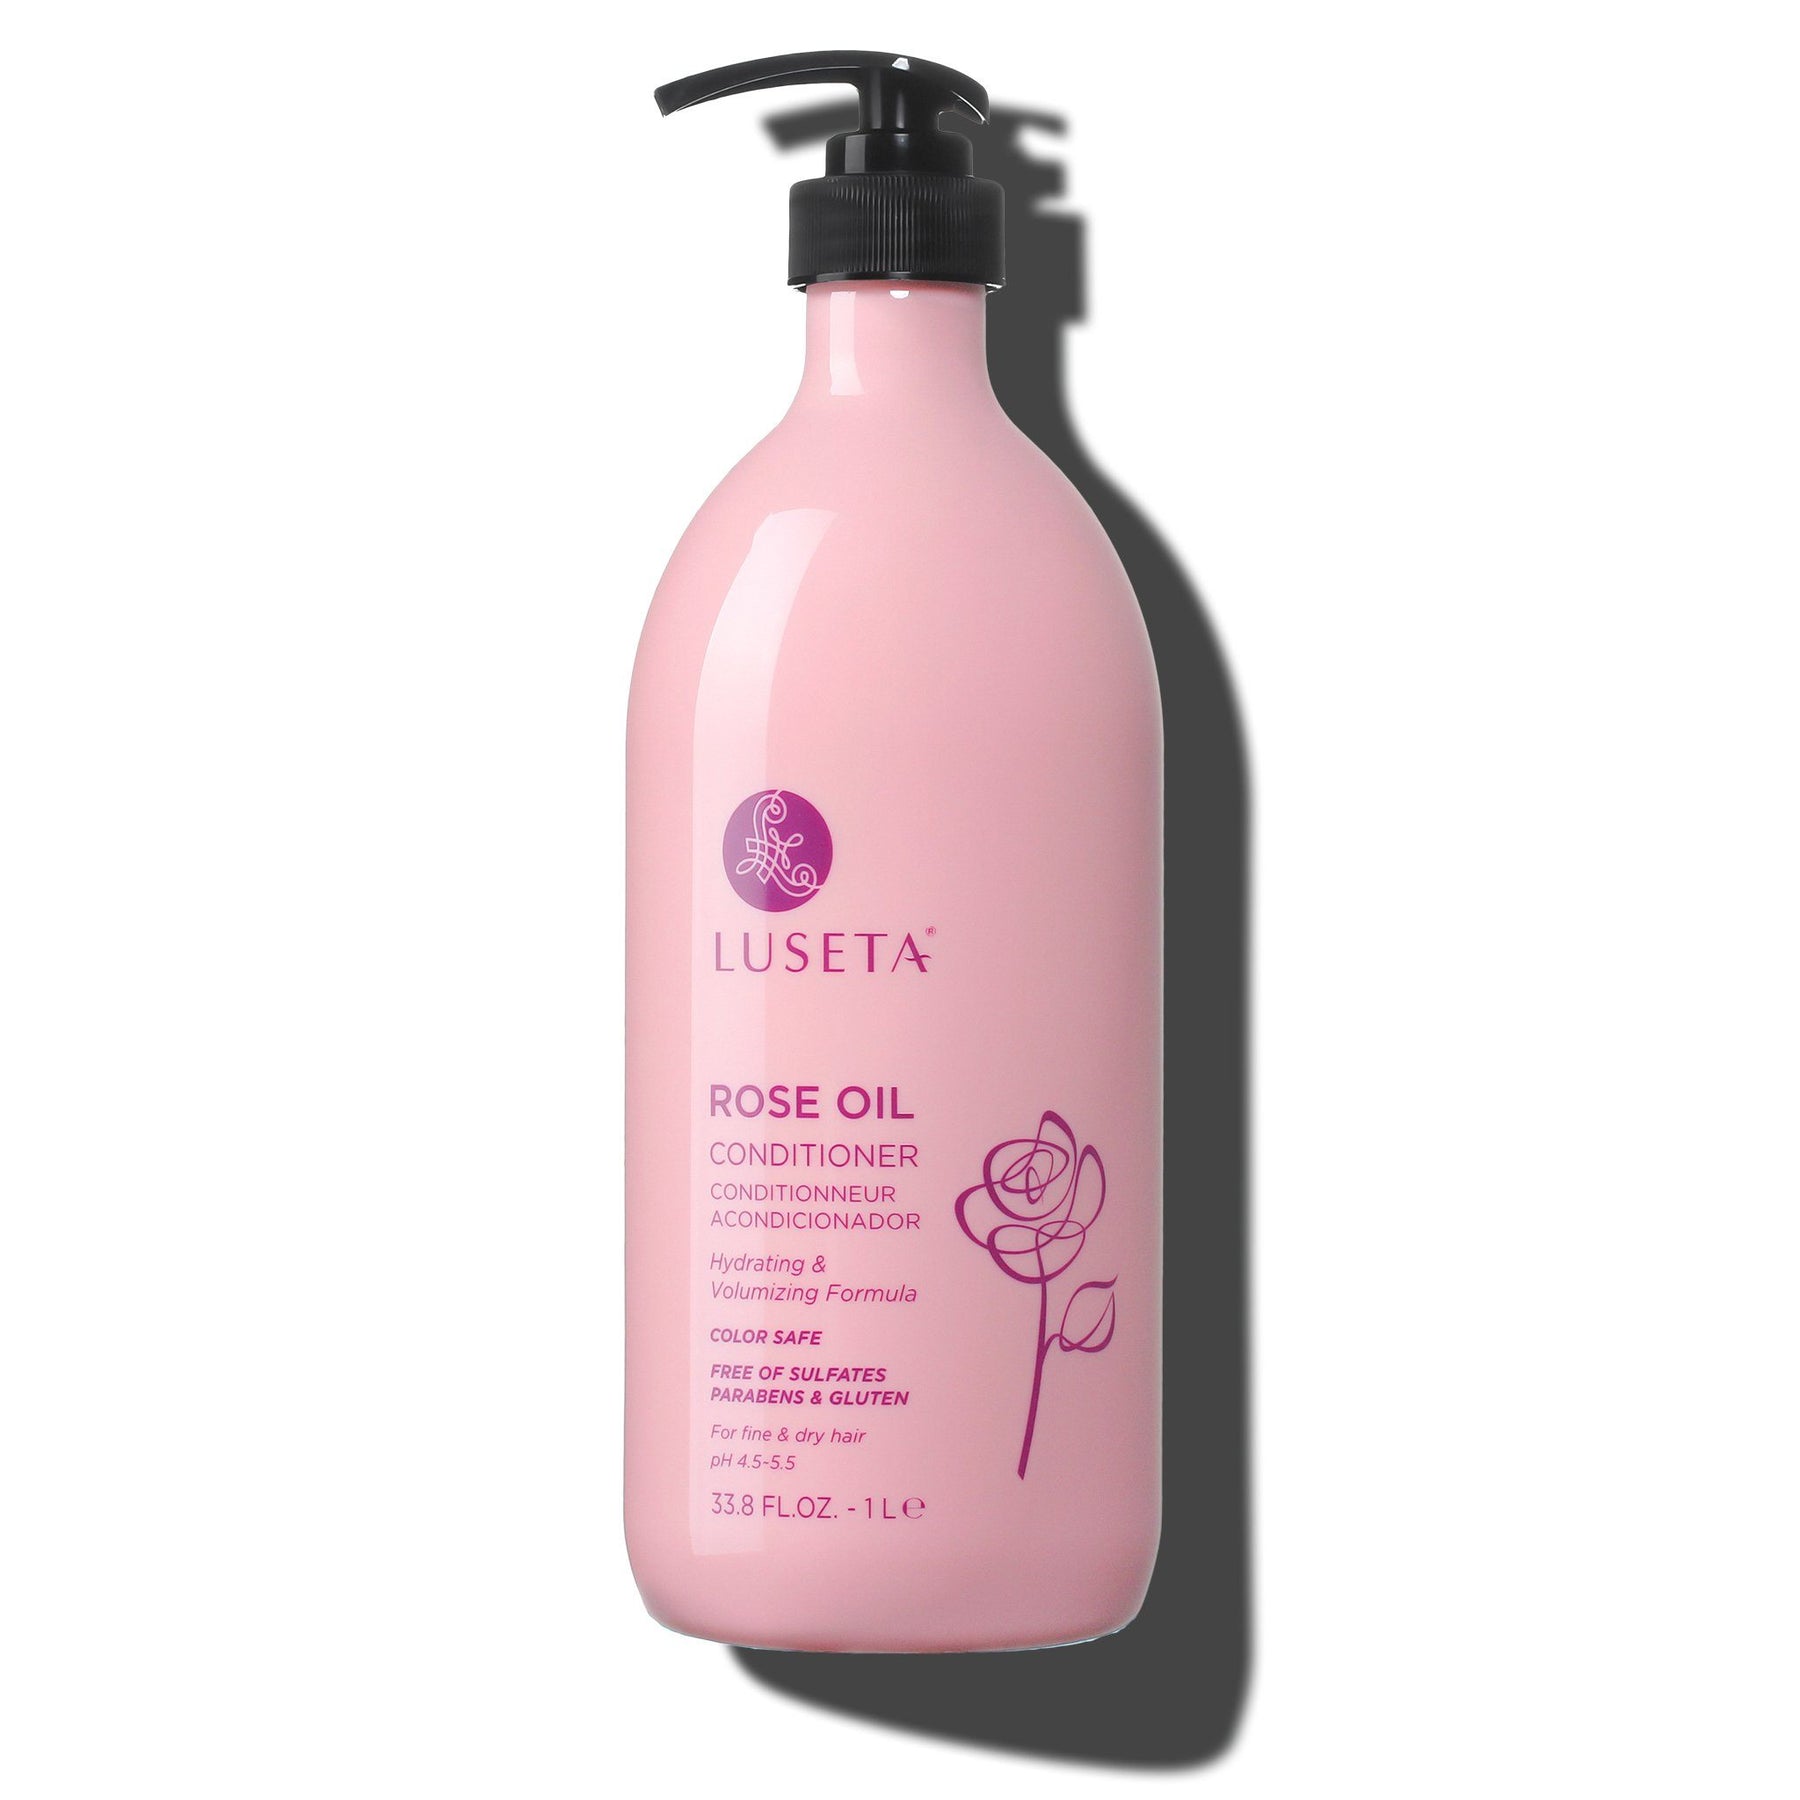 Rose Oil Conditioner - 33.8oz - by Luseta Beauty |ProCare Outlet|